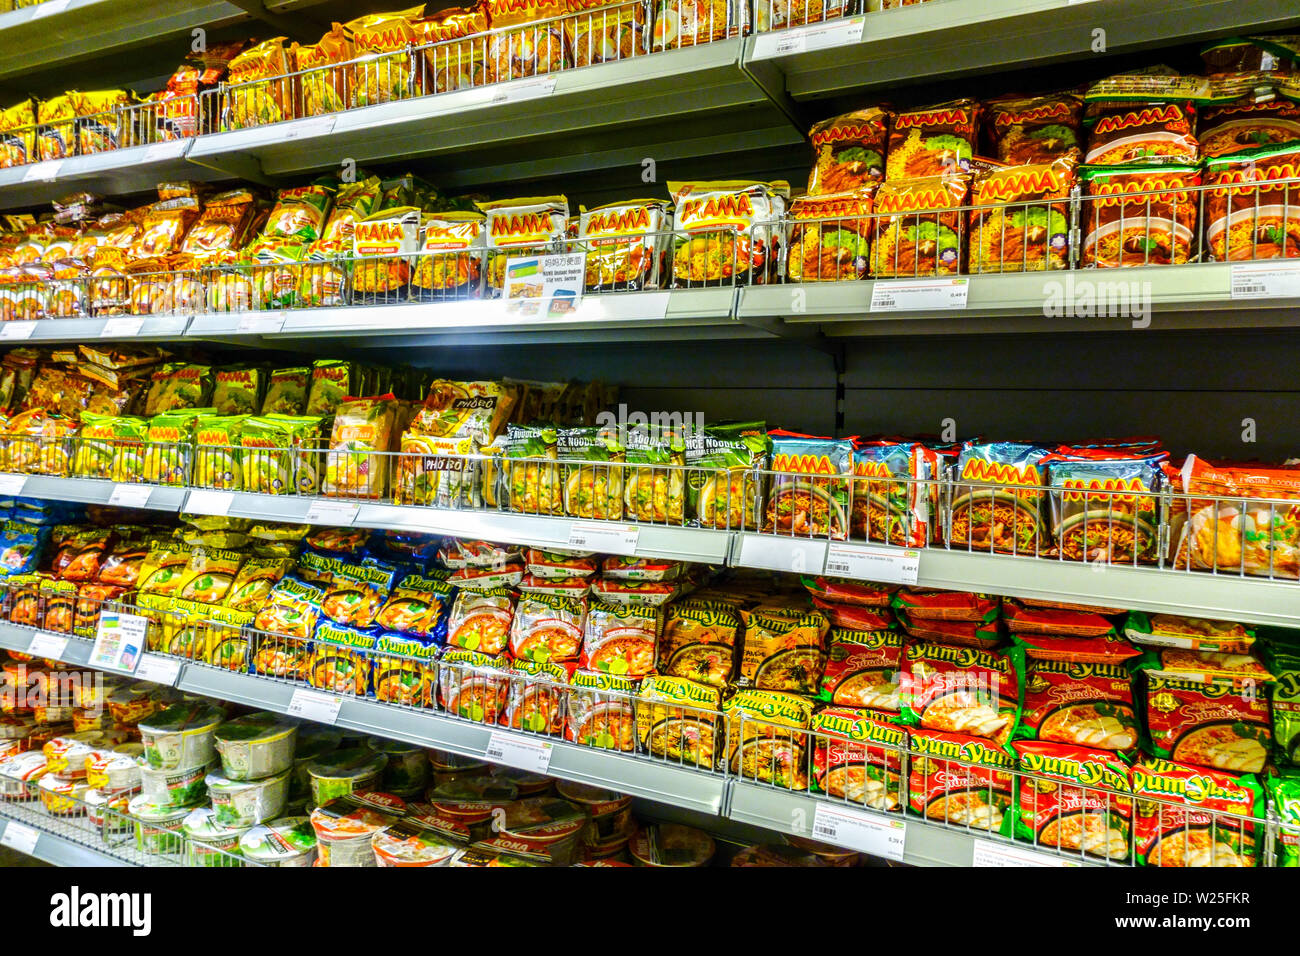 Only Asian products in the supermarket 'Go Asia', instant soups, Dresden, Germany supermarket shelves Stock Photo